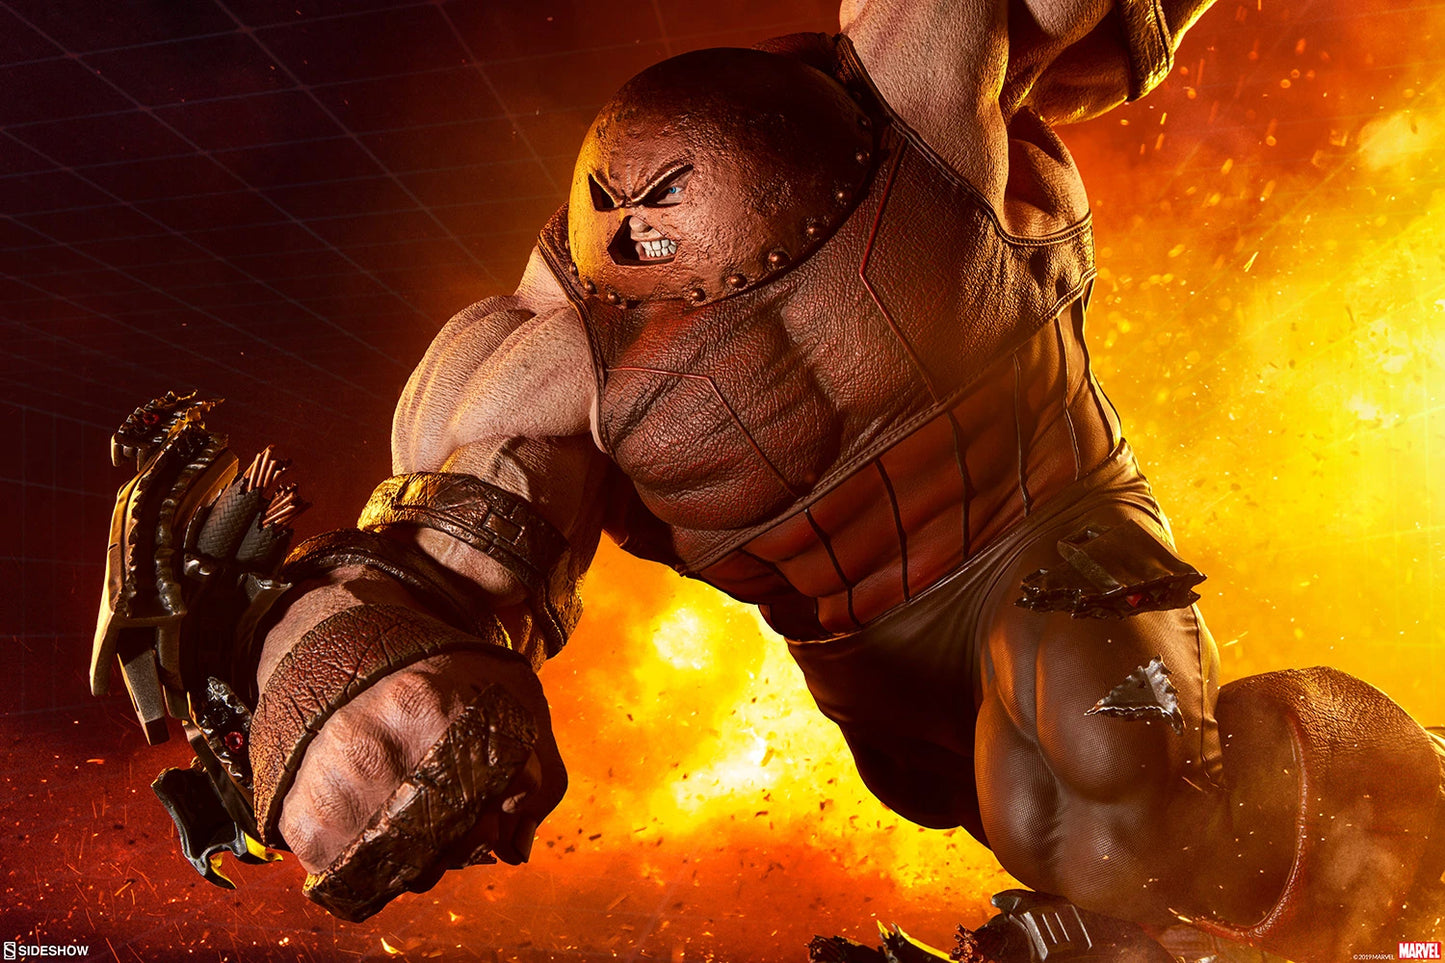 SIDESHOW JUGGERNAUT MAQUETTE - 300247 - Anotoys Collectibles